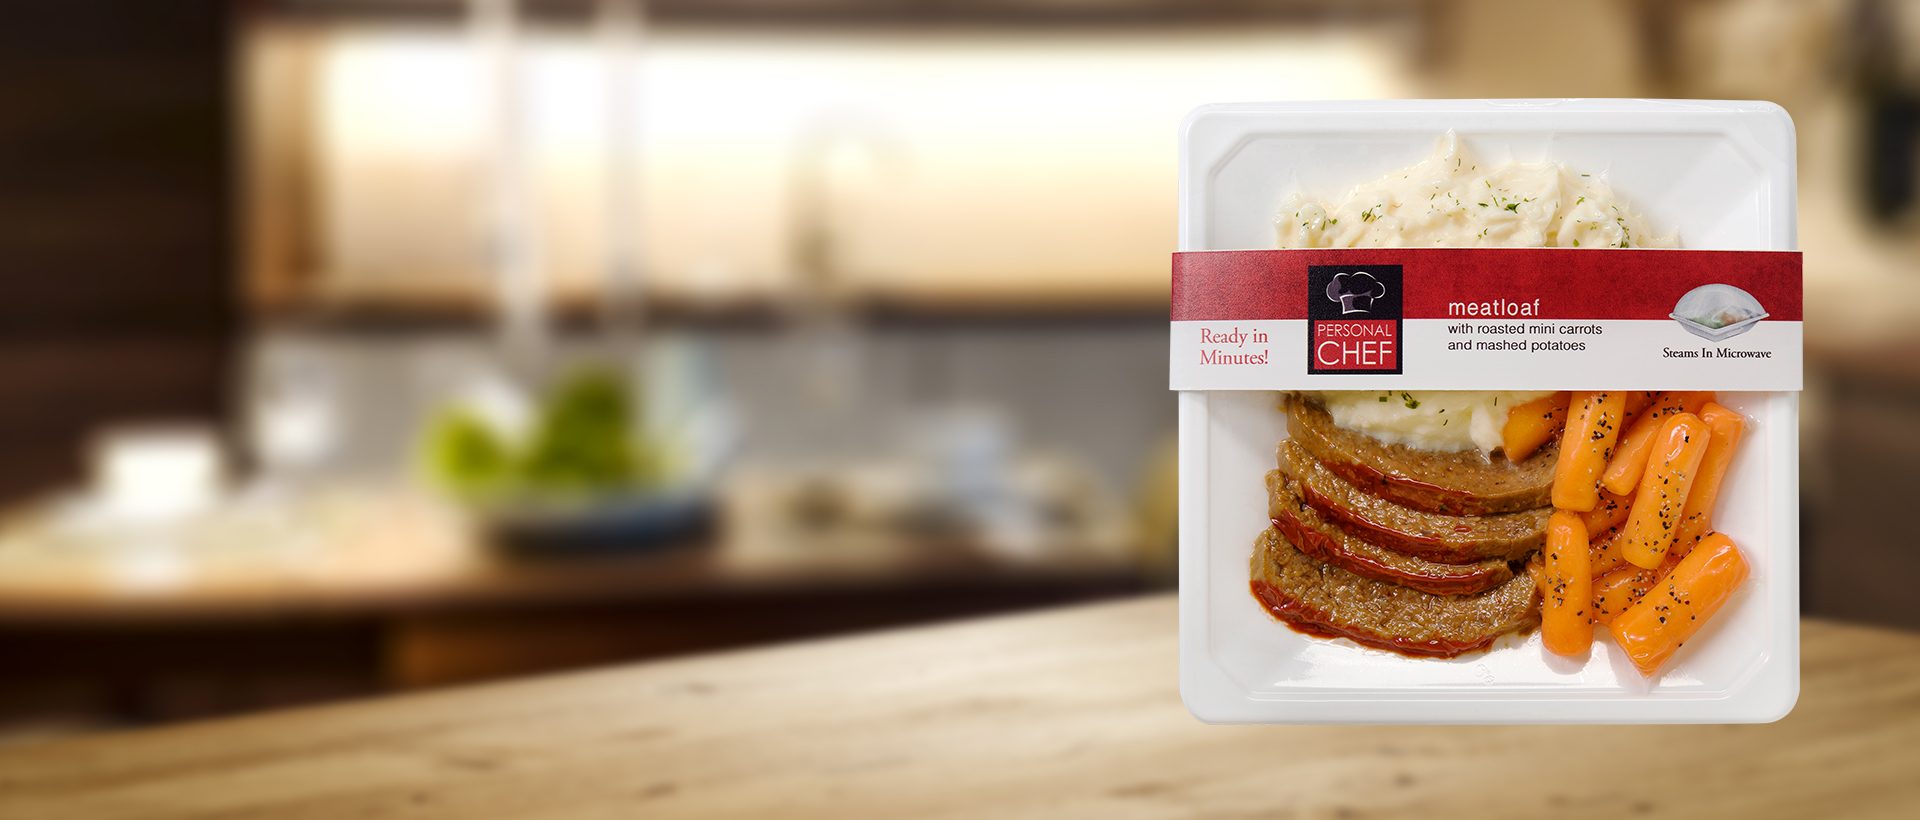 Simple Steps® Meal Packaging with meatloaf, carrots and mashed potatoes